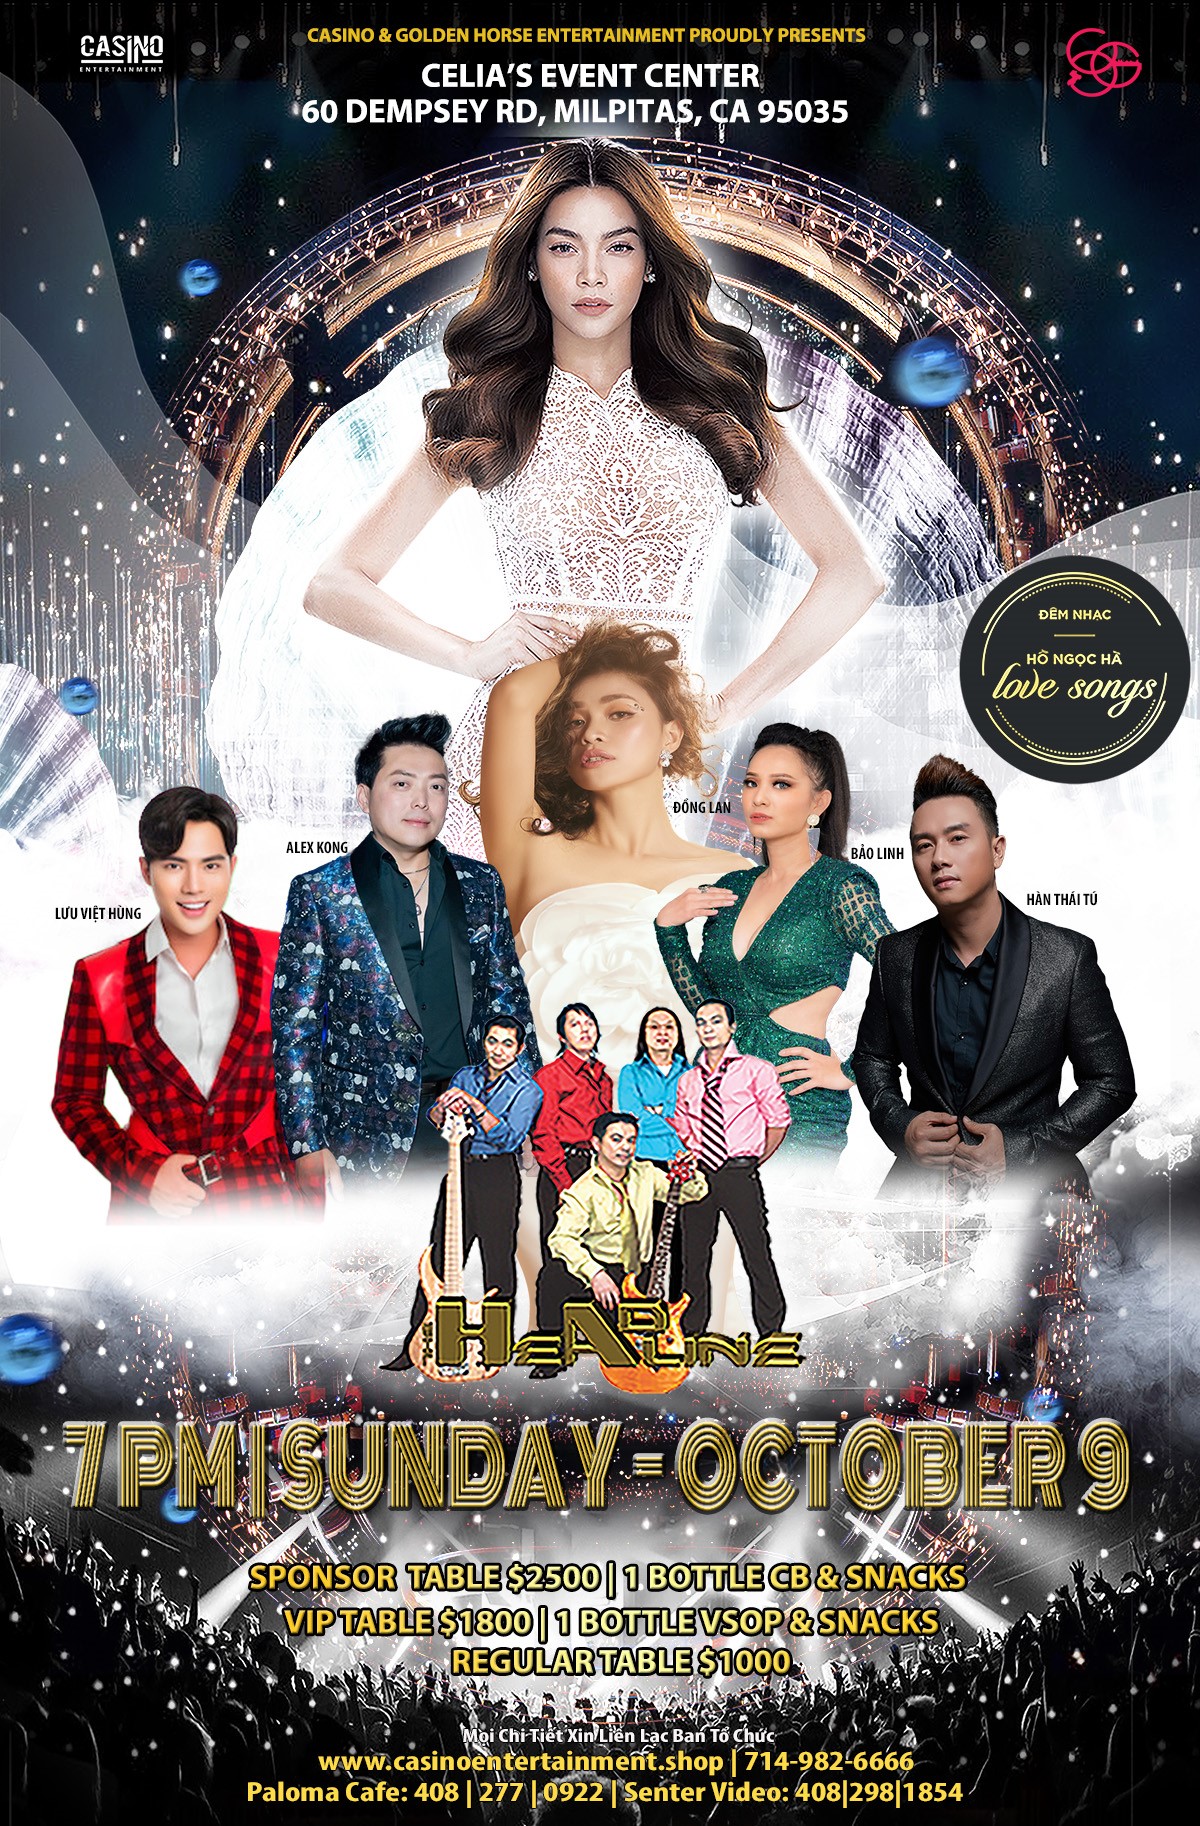 Hồ Ngọc Hà | Love Songs Celia's Event Center on oct. 09, 19:00@San Jose Celias Event Center - Pick a seat, Buy tickets and Get information on www.casinoentertainment.shop casinoentertainment